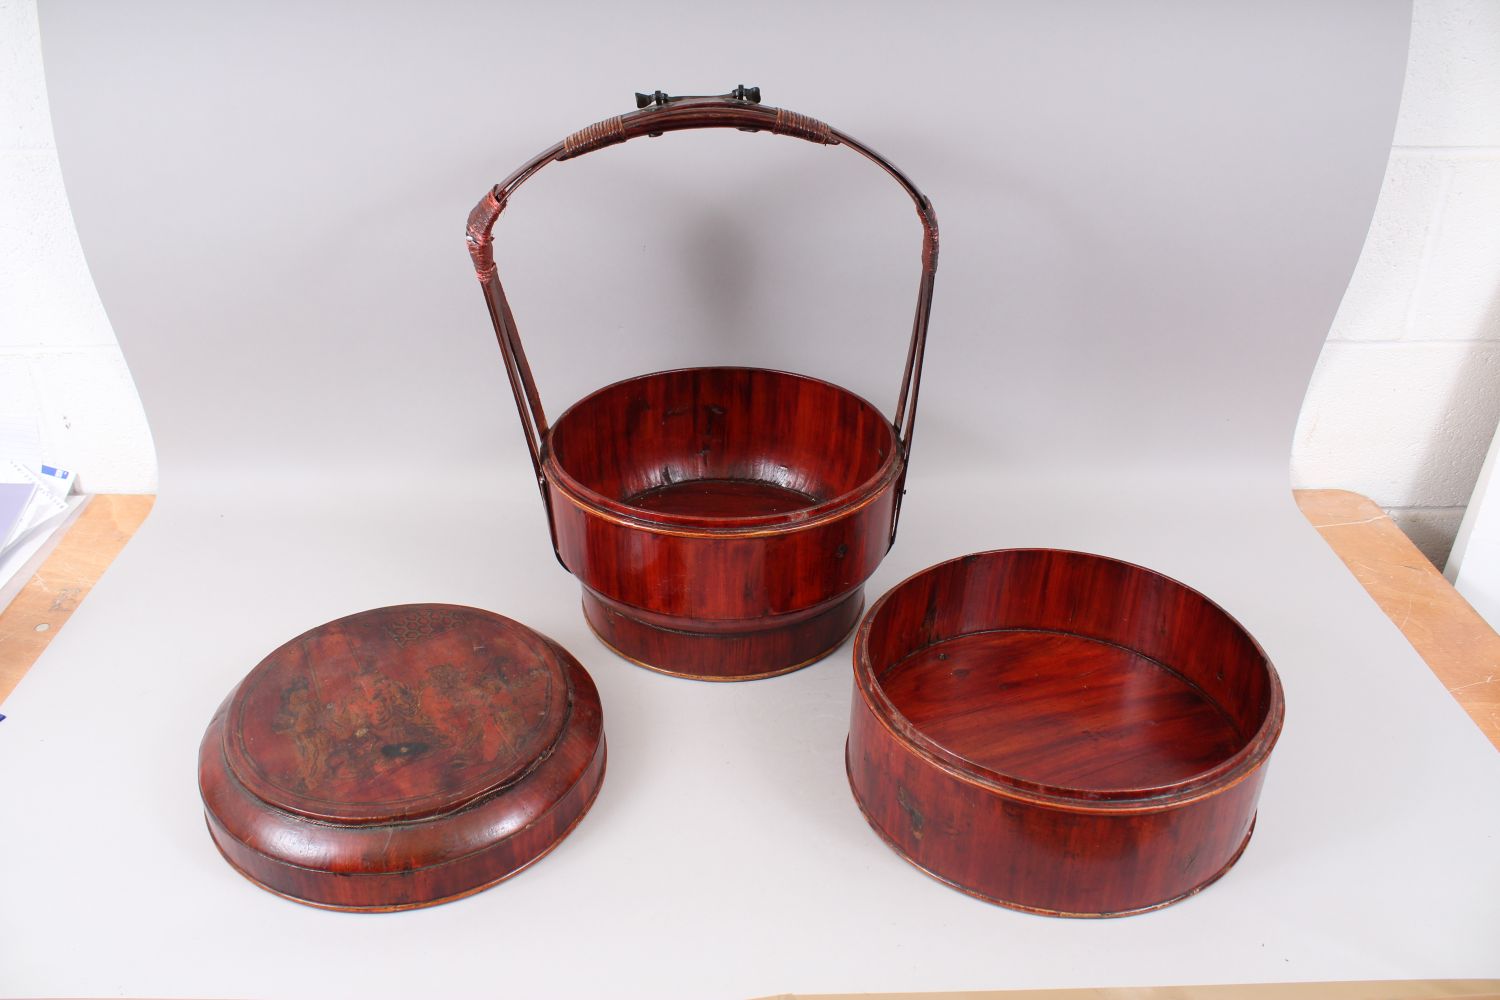 A GOOD CHINESE WOODEN & LACQUER TWO TIER WEDDING BASKET, the lid with lacquered decoration to depict - Image 2 of 3